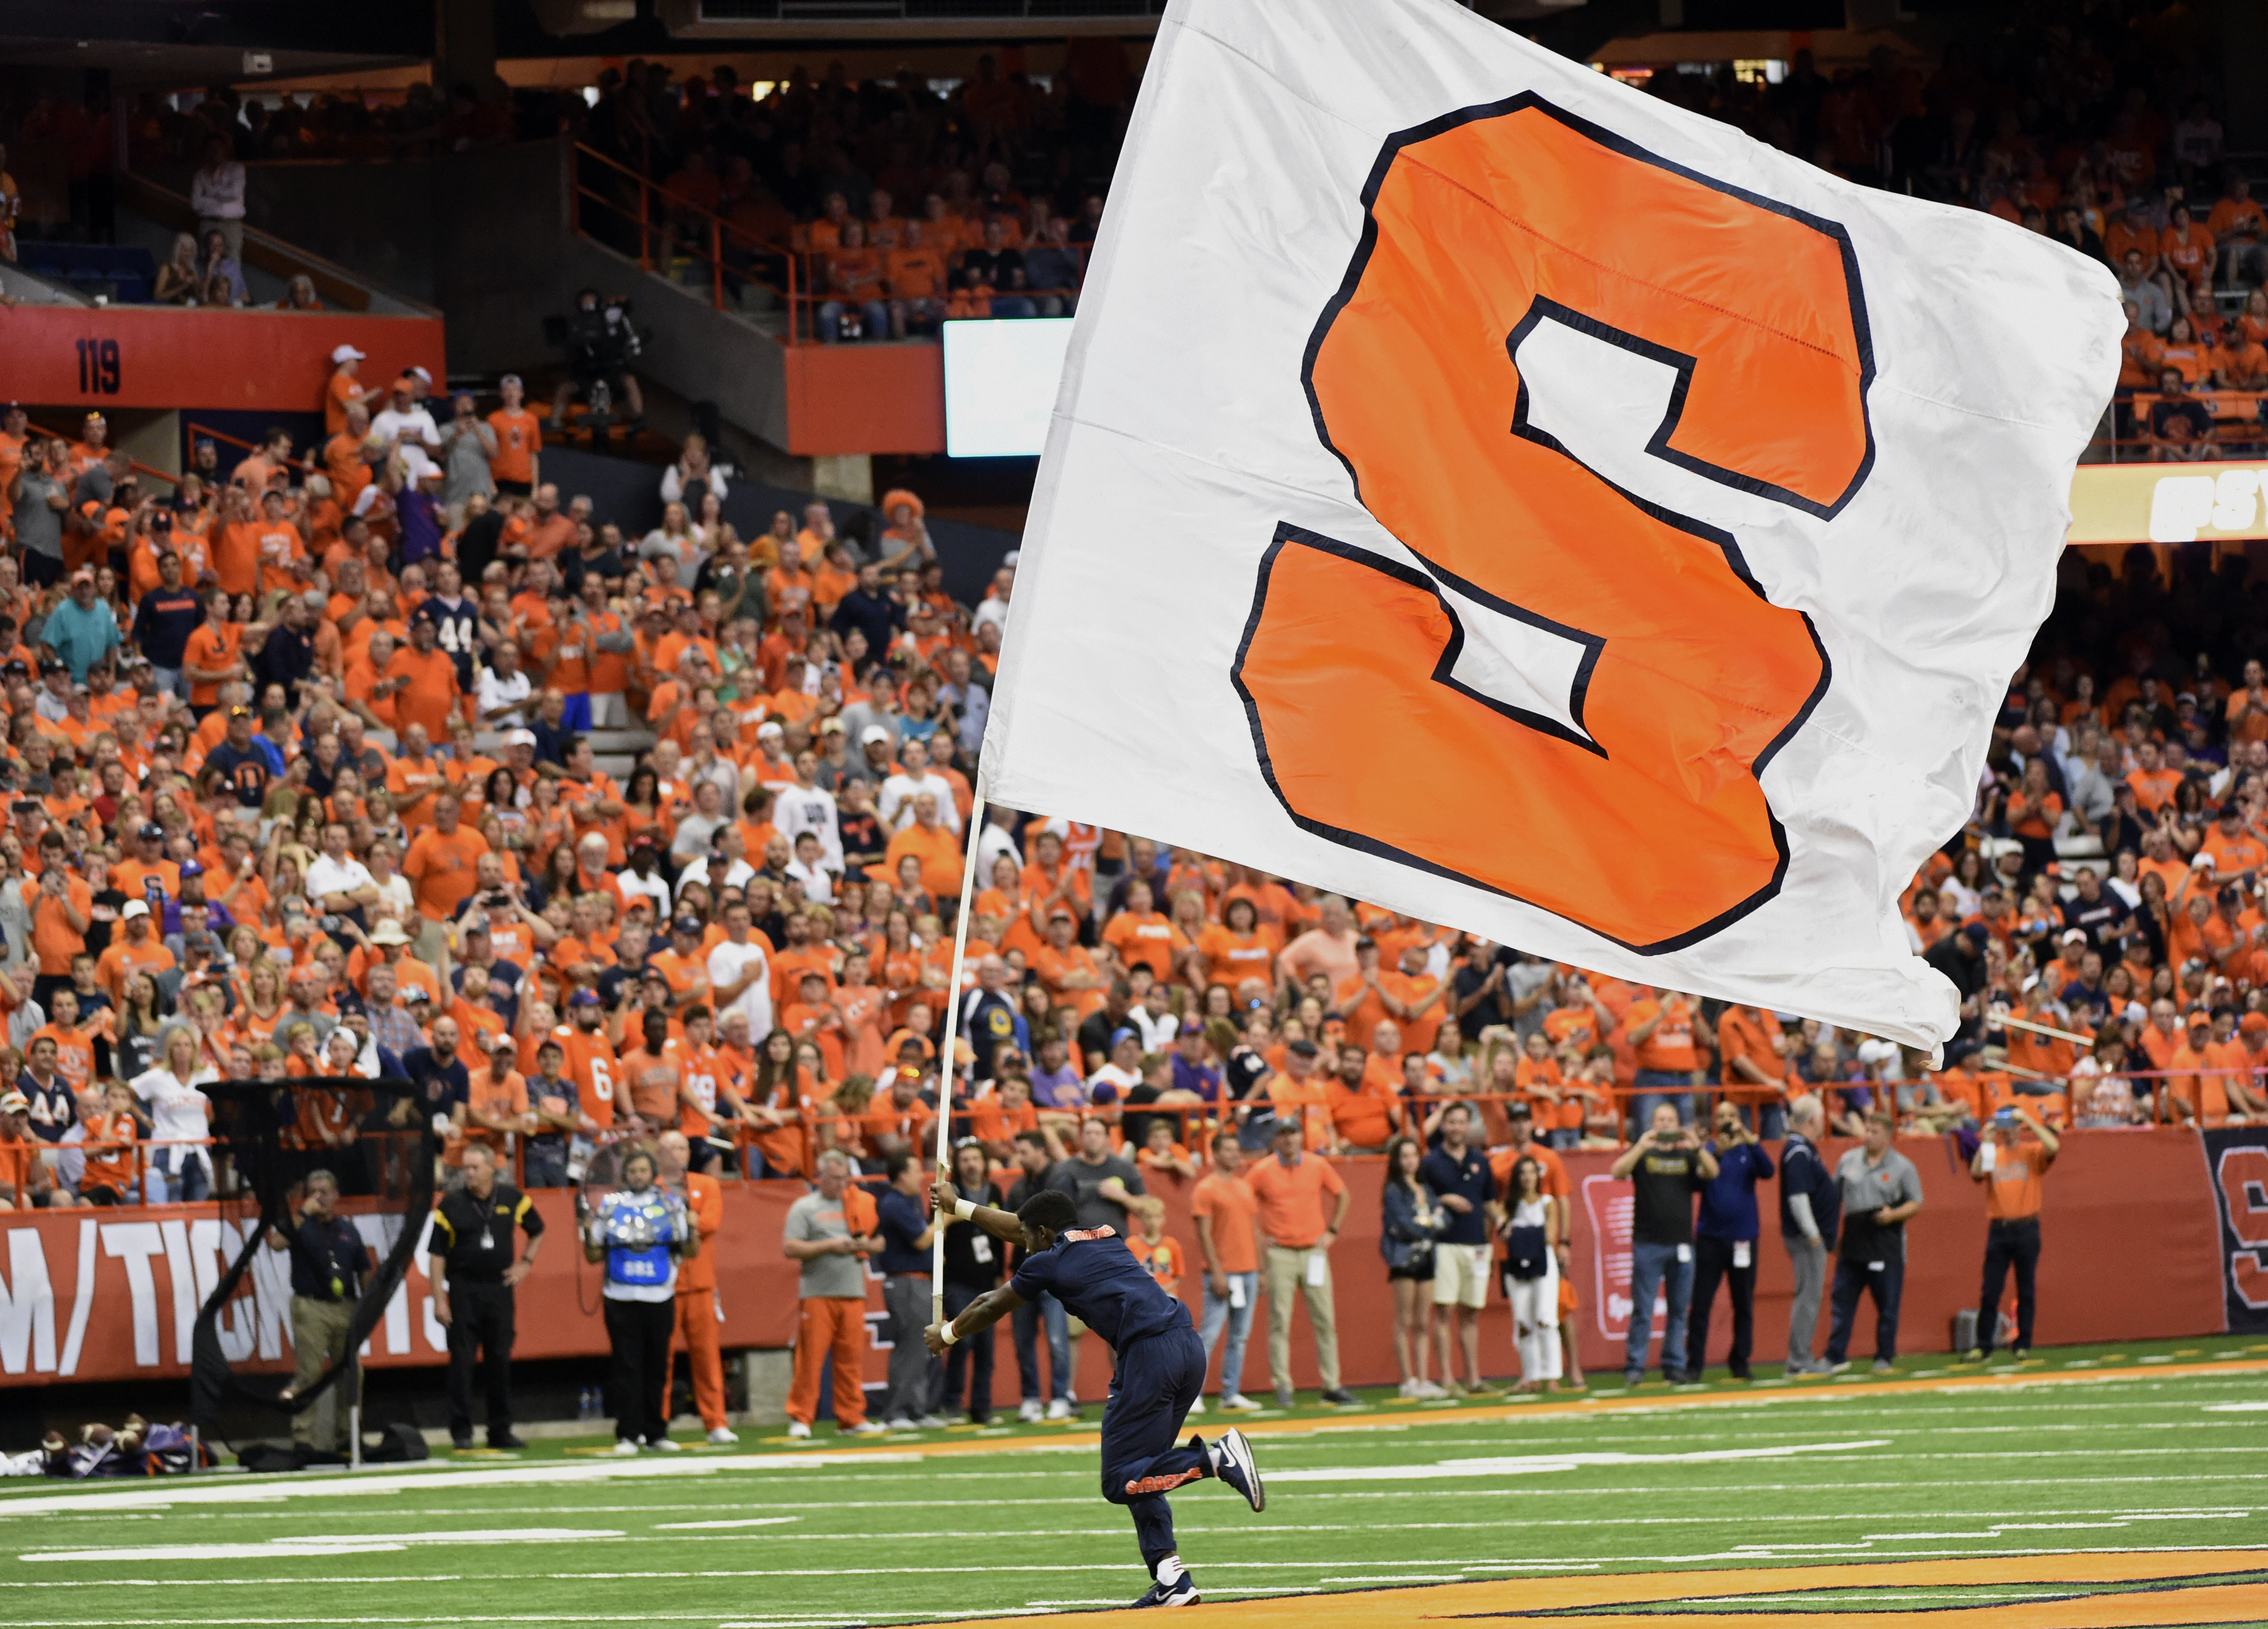 Crowd management experts weigh in on Carrier Dome clear-bag policy - The  Daily Orange